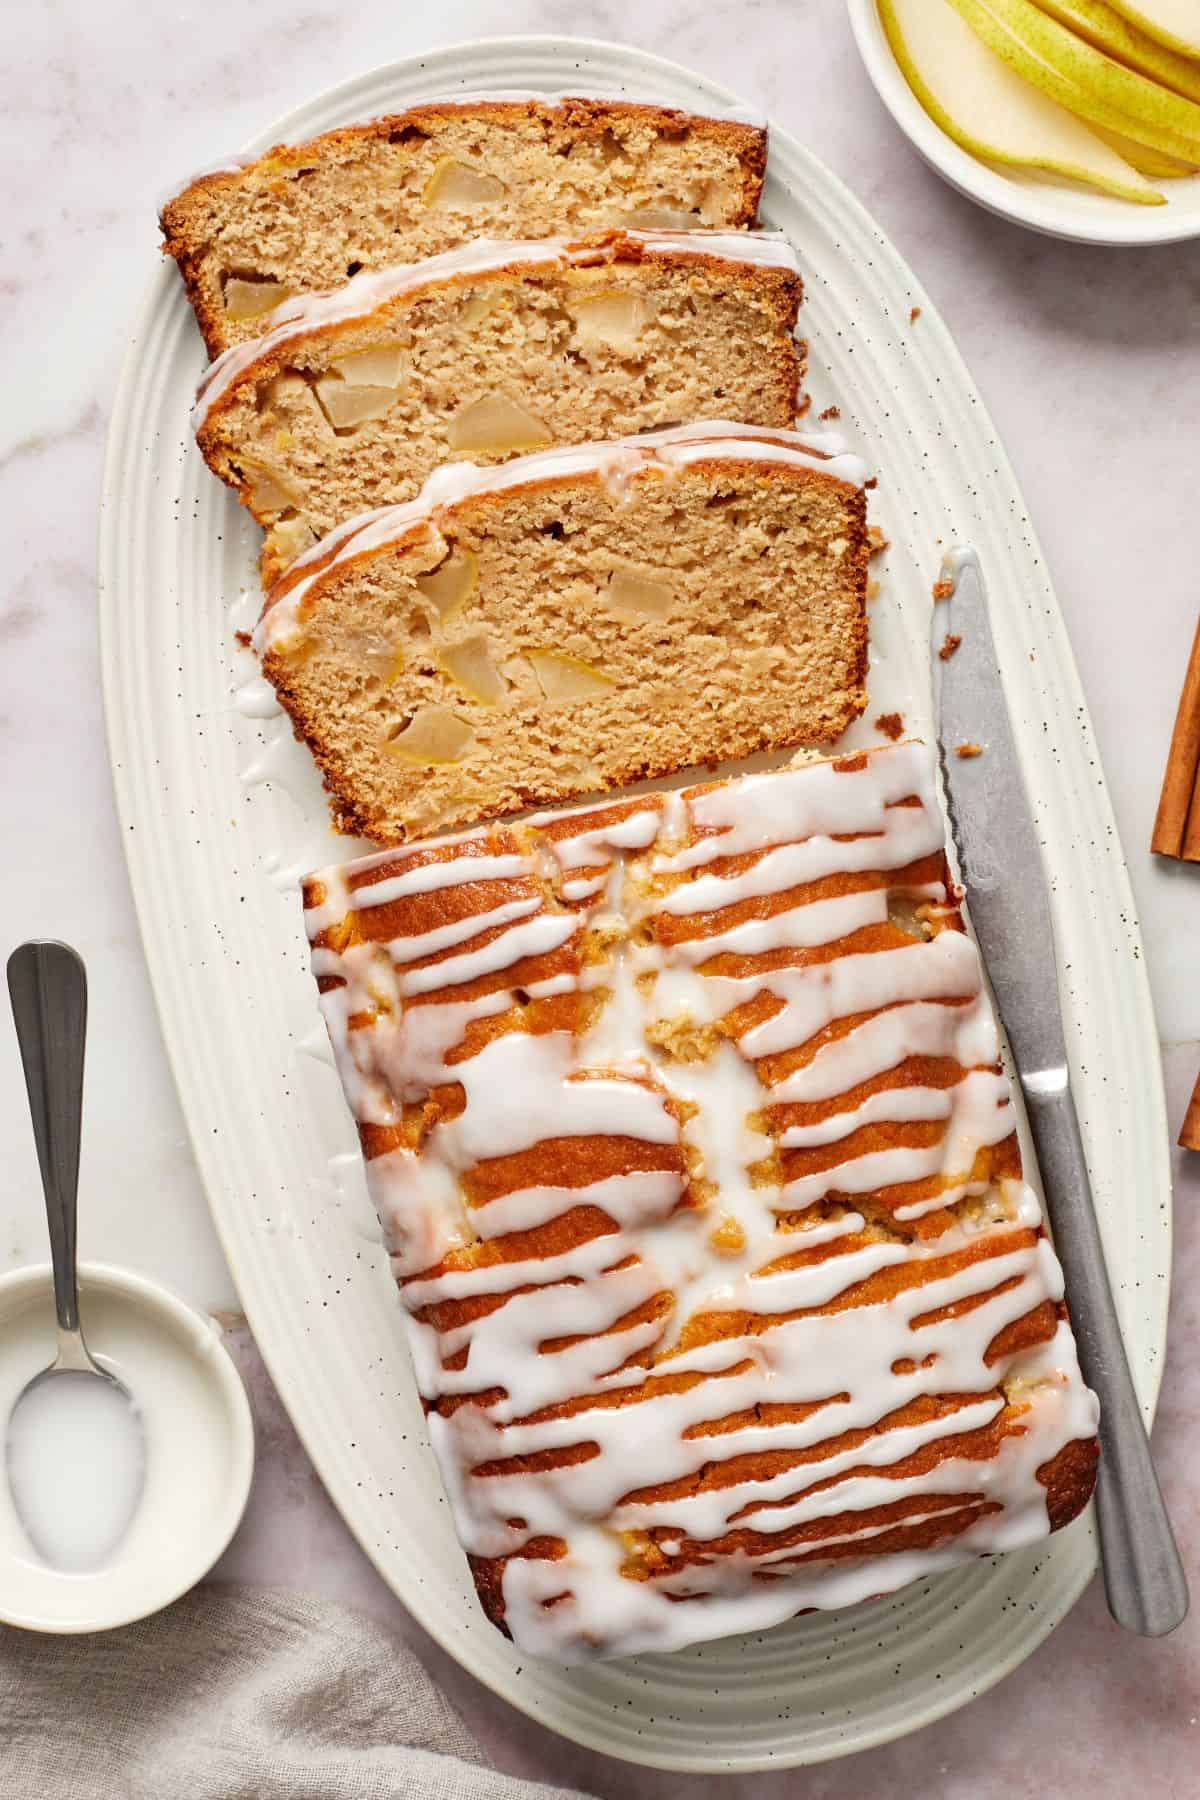 Pear Loaf Cake, with three slices cut, sitting on a white oval platter, with a knife on the side.